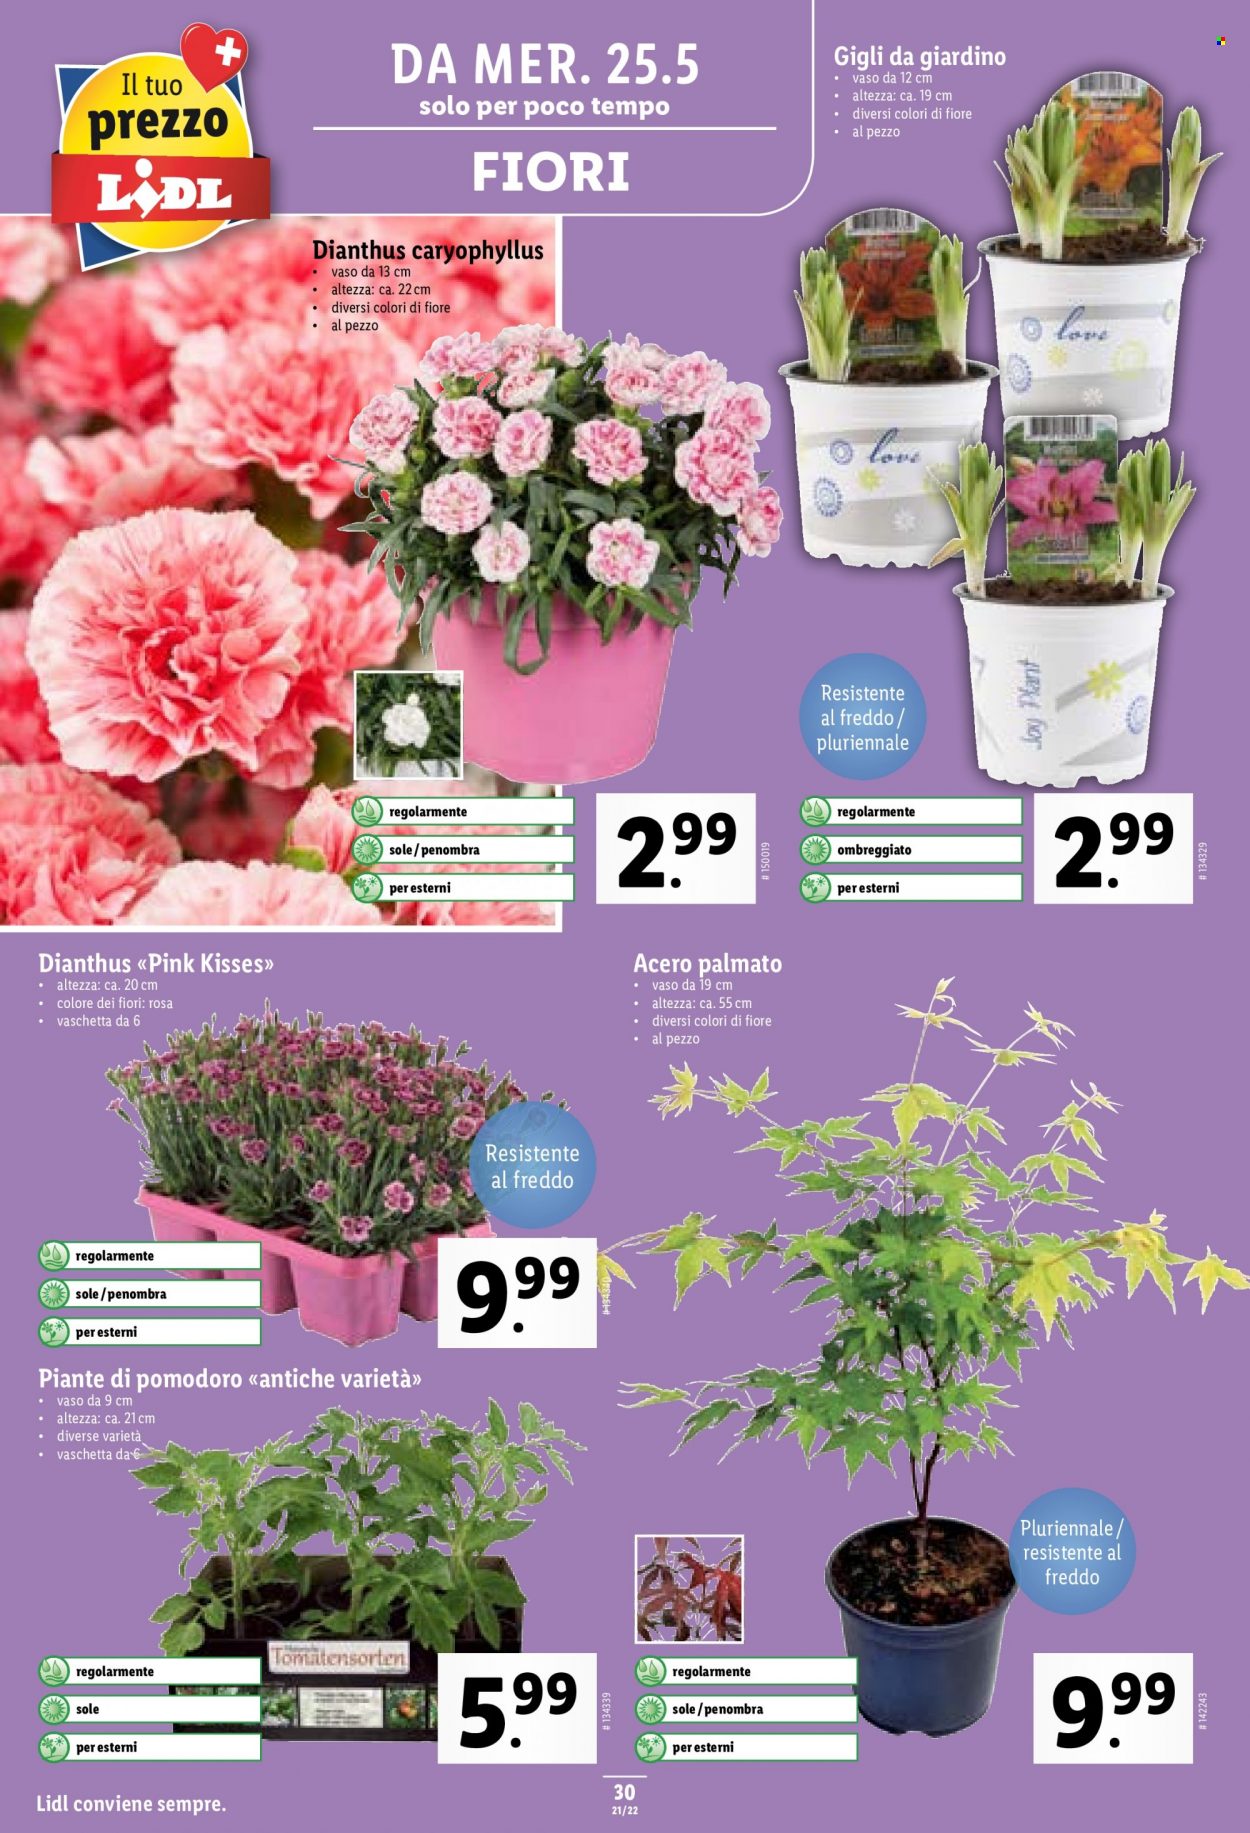 Catalogue Lidl - 25.5.2022 - 1.6.2022. Page 30.